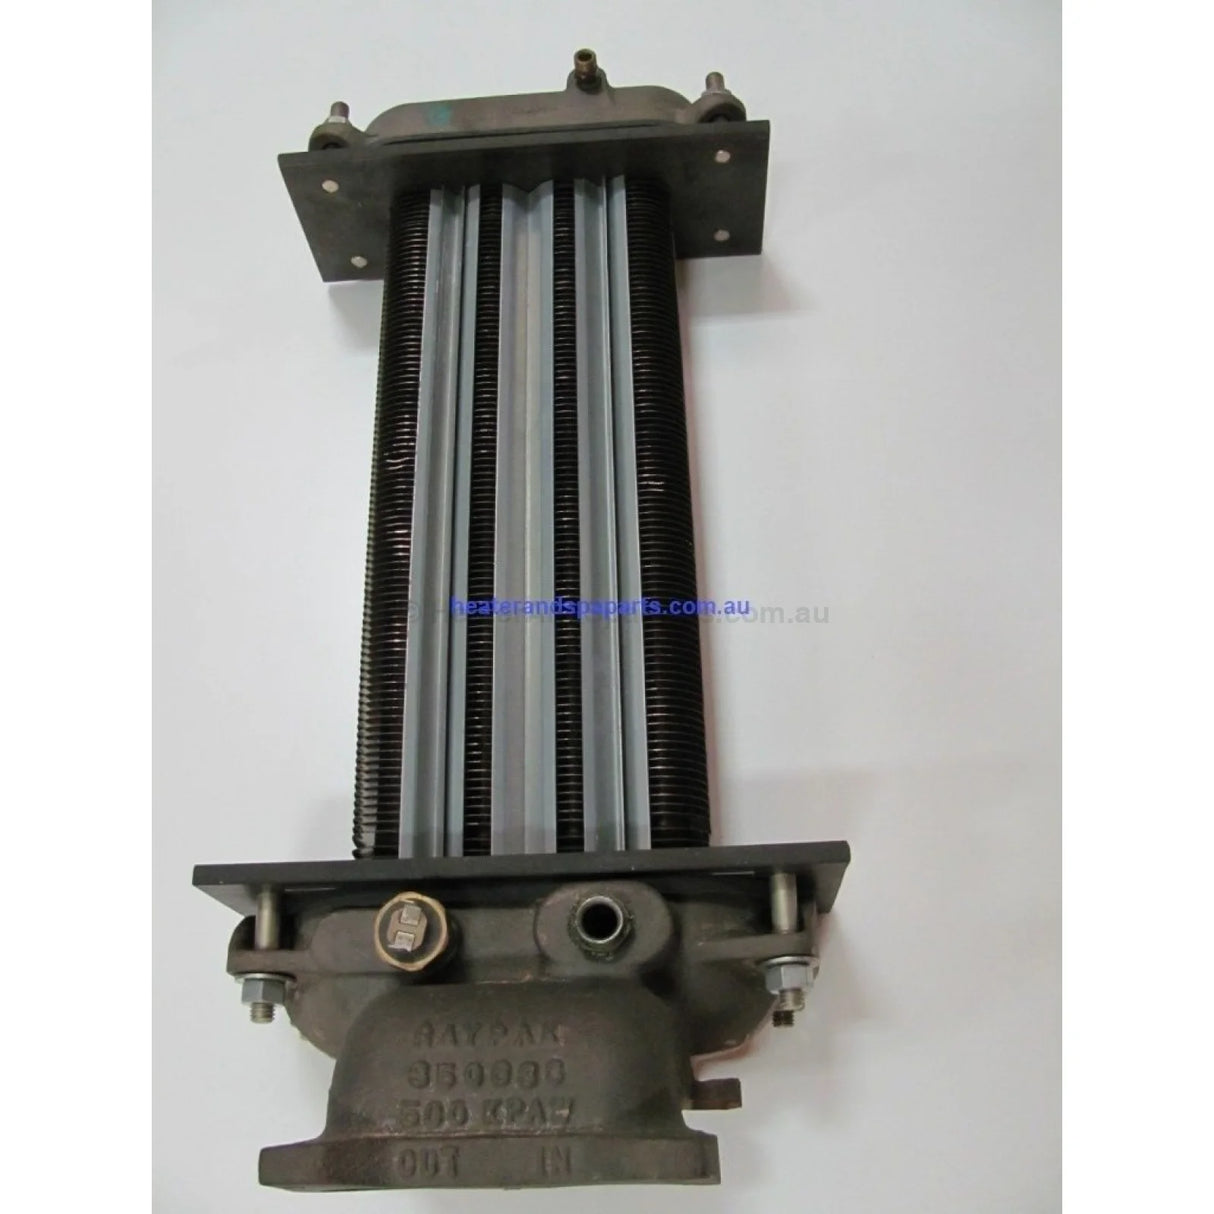 Raypak 127 &167 Gas Heater Spare Parts - Heater and Spa Parts